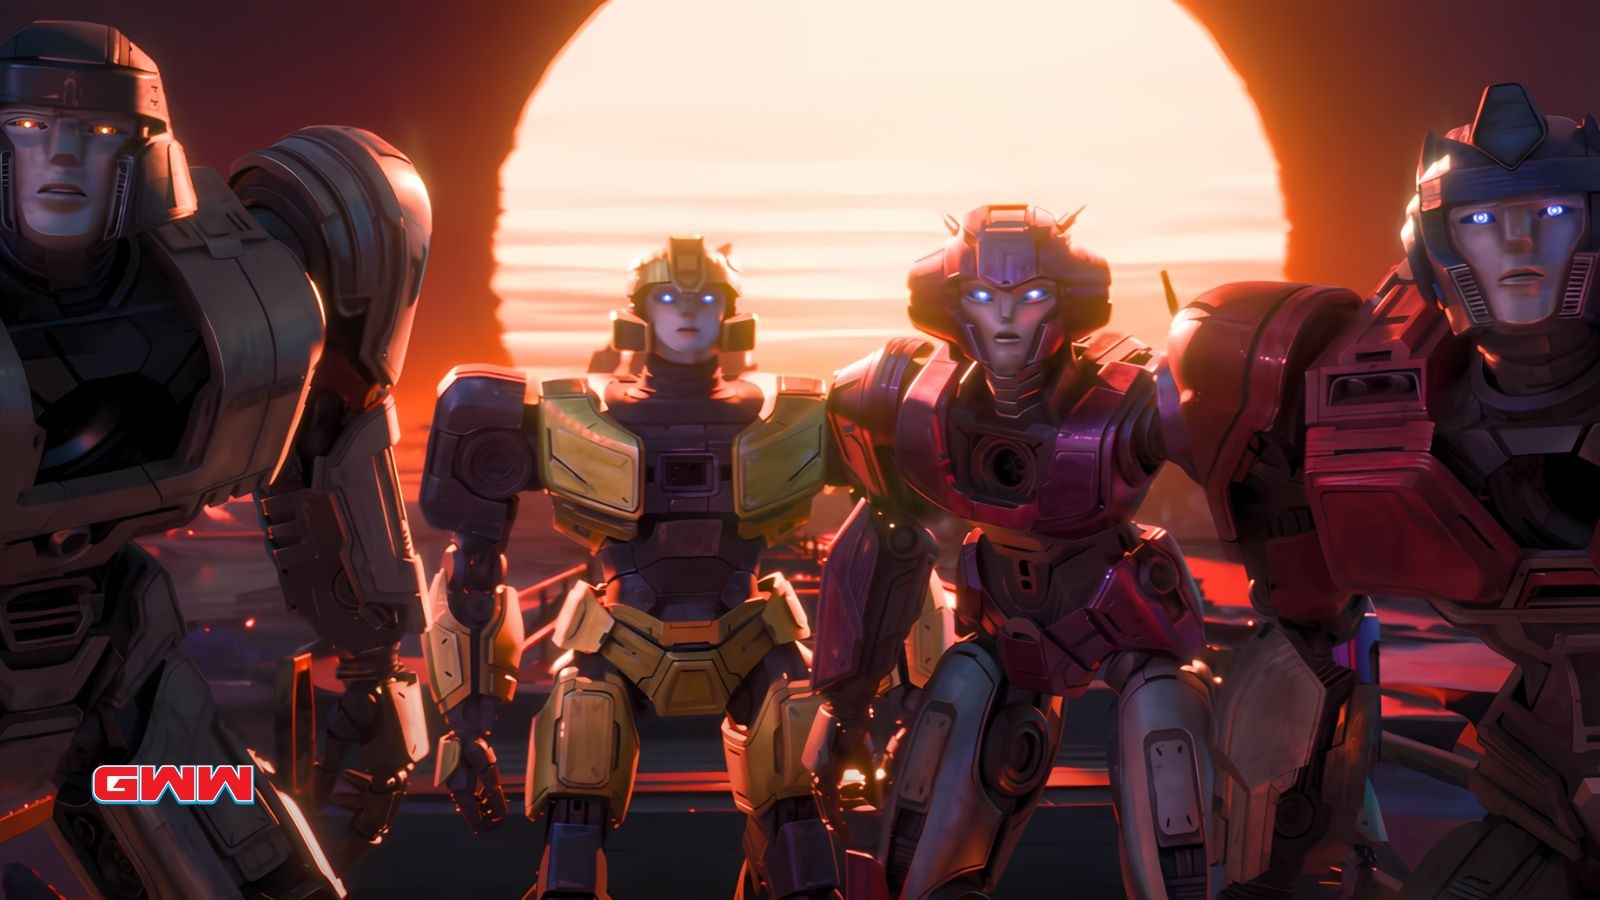 Orion Pax, Elita, D-16, and B-127 standing against a sunset background.